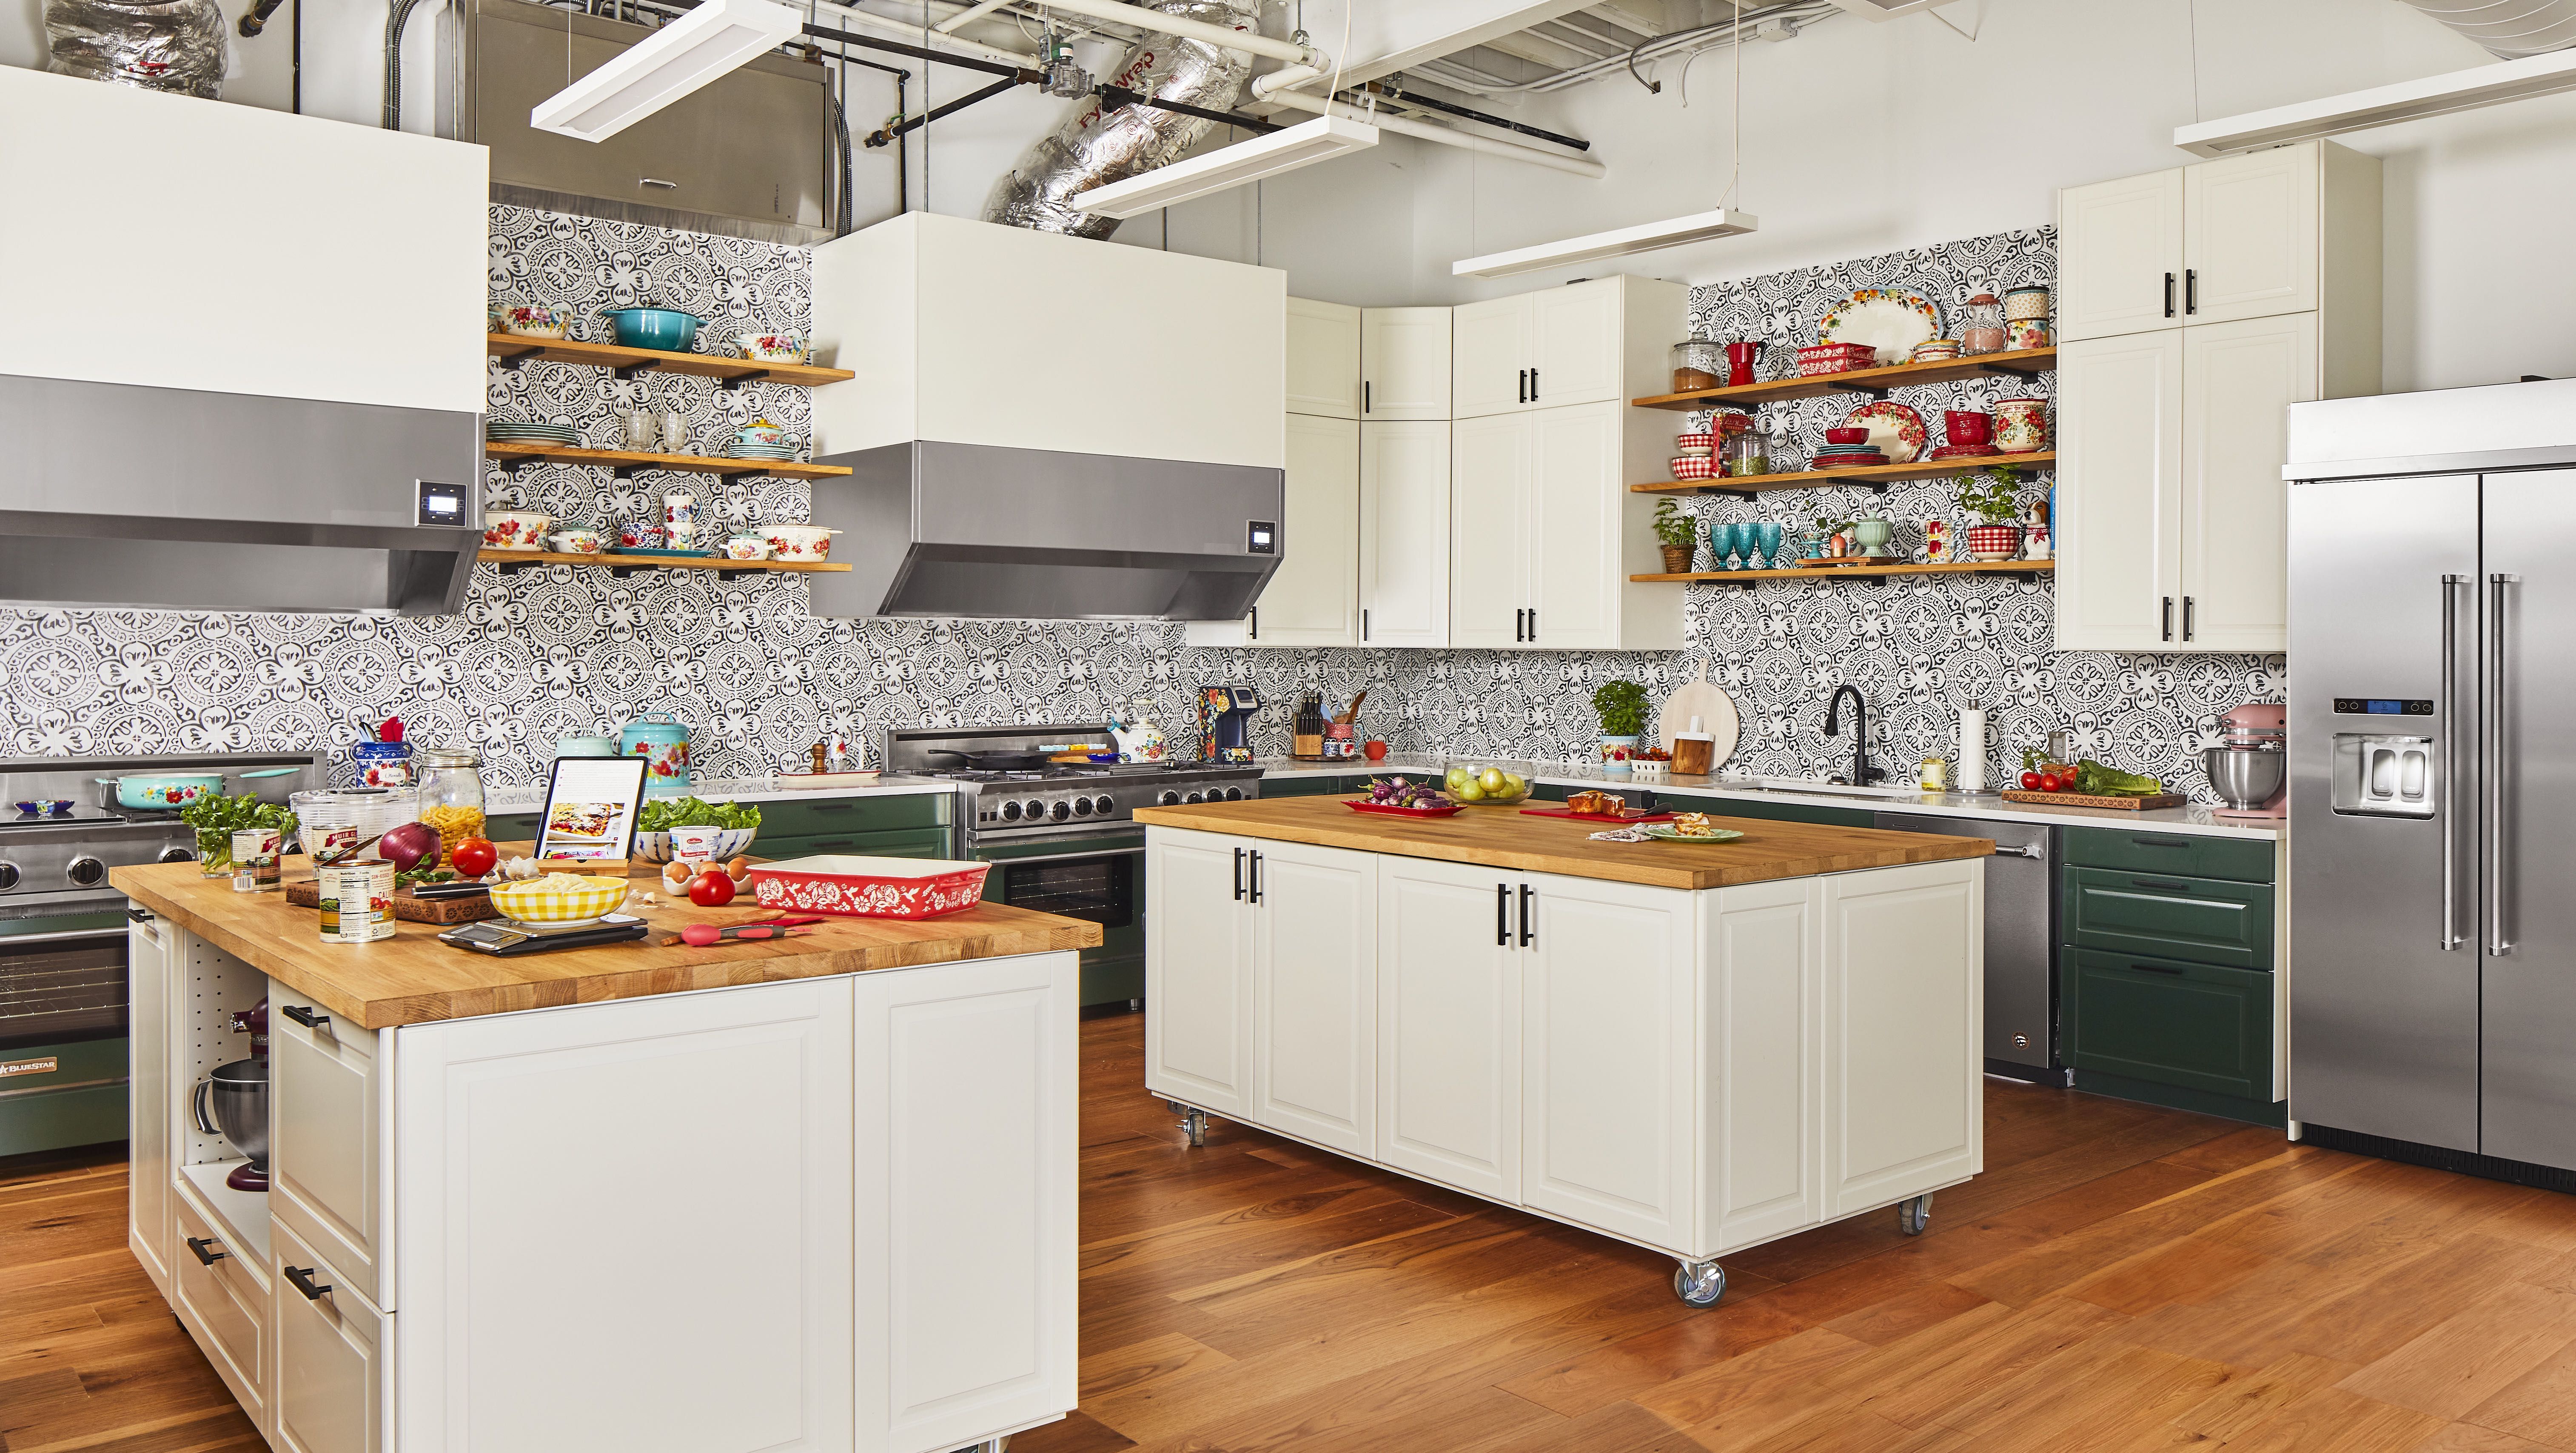 Pioneer Woman's new kitchen line is decorative and affordable